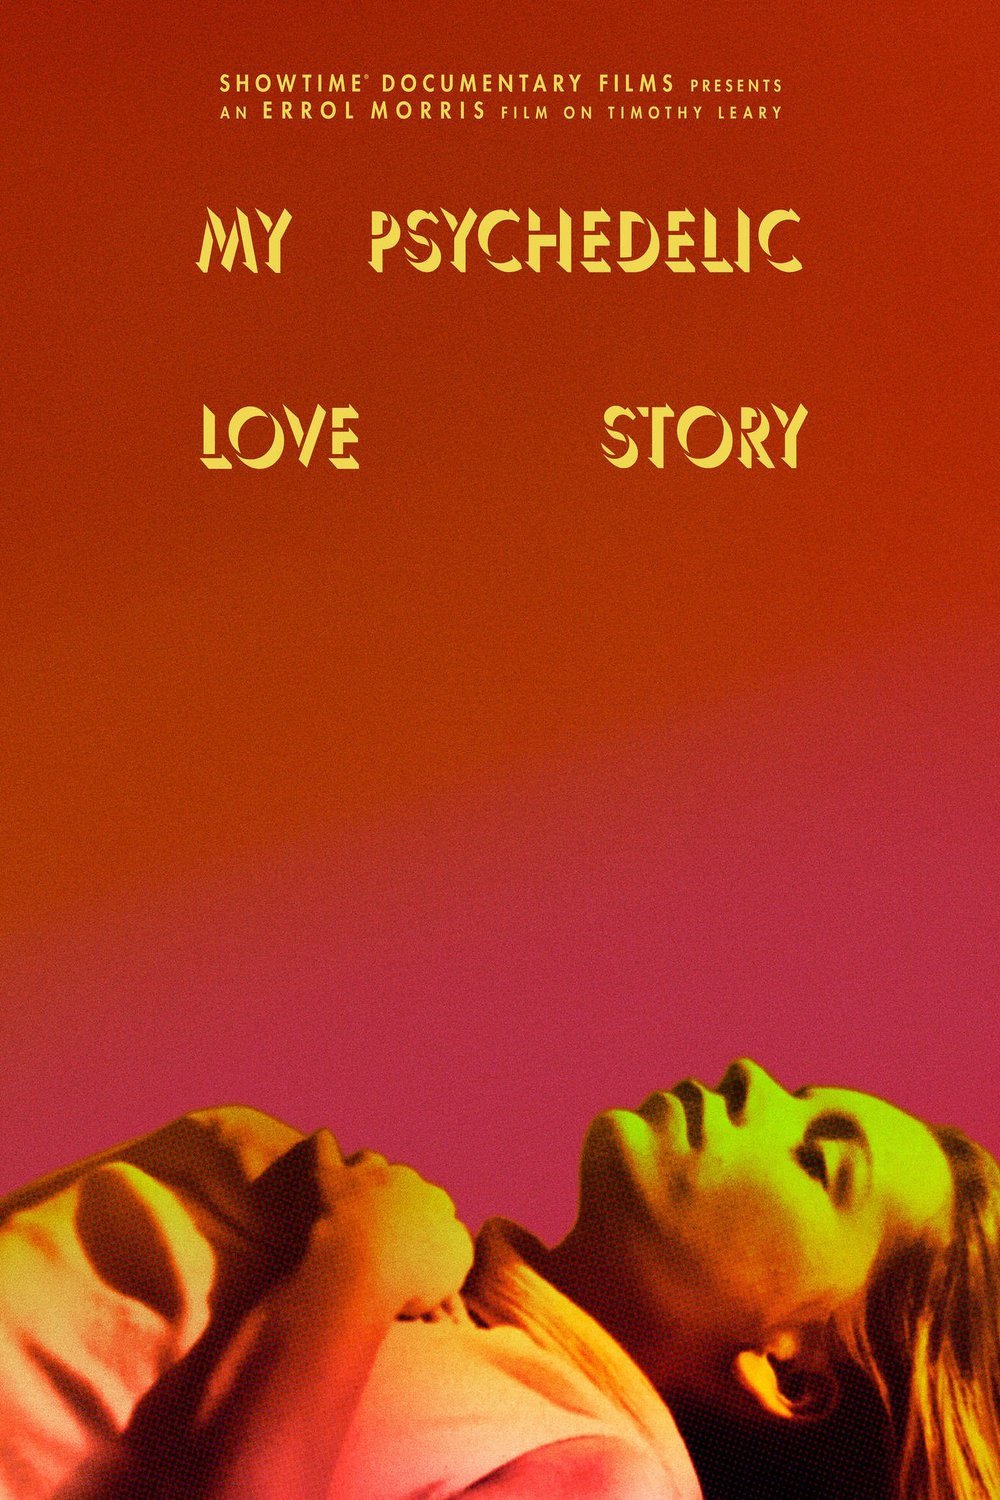 Poster of the movie My Psychedelic Love Story